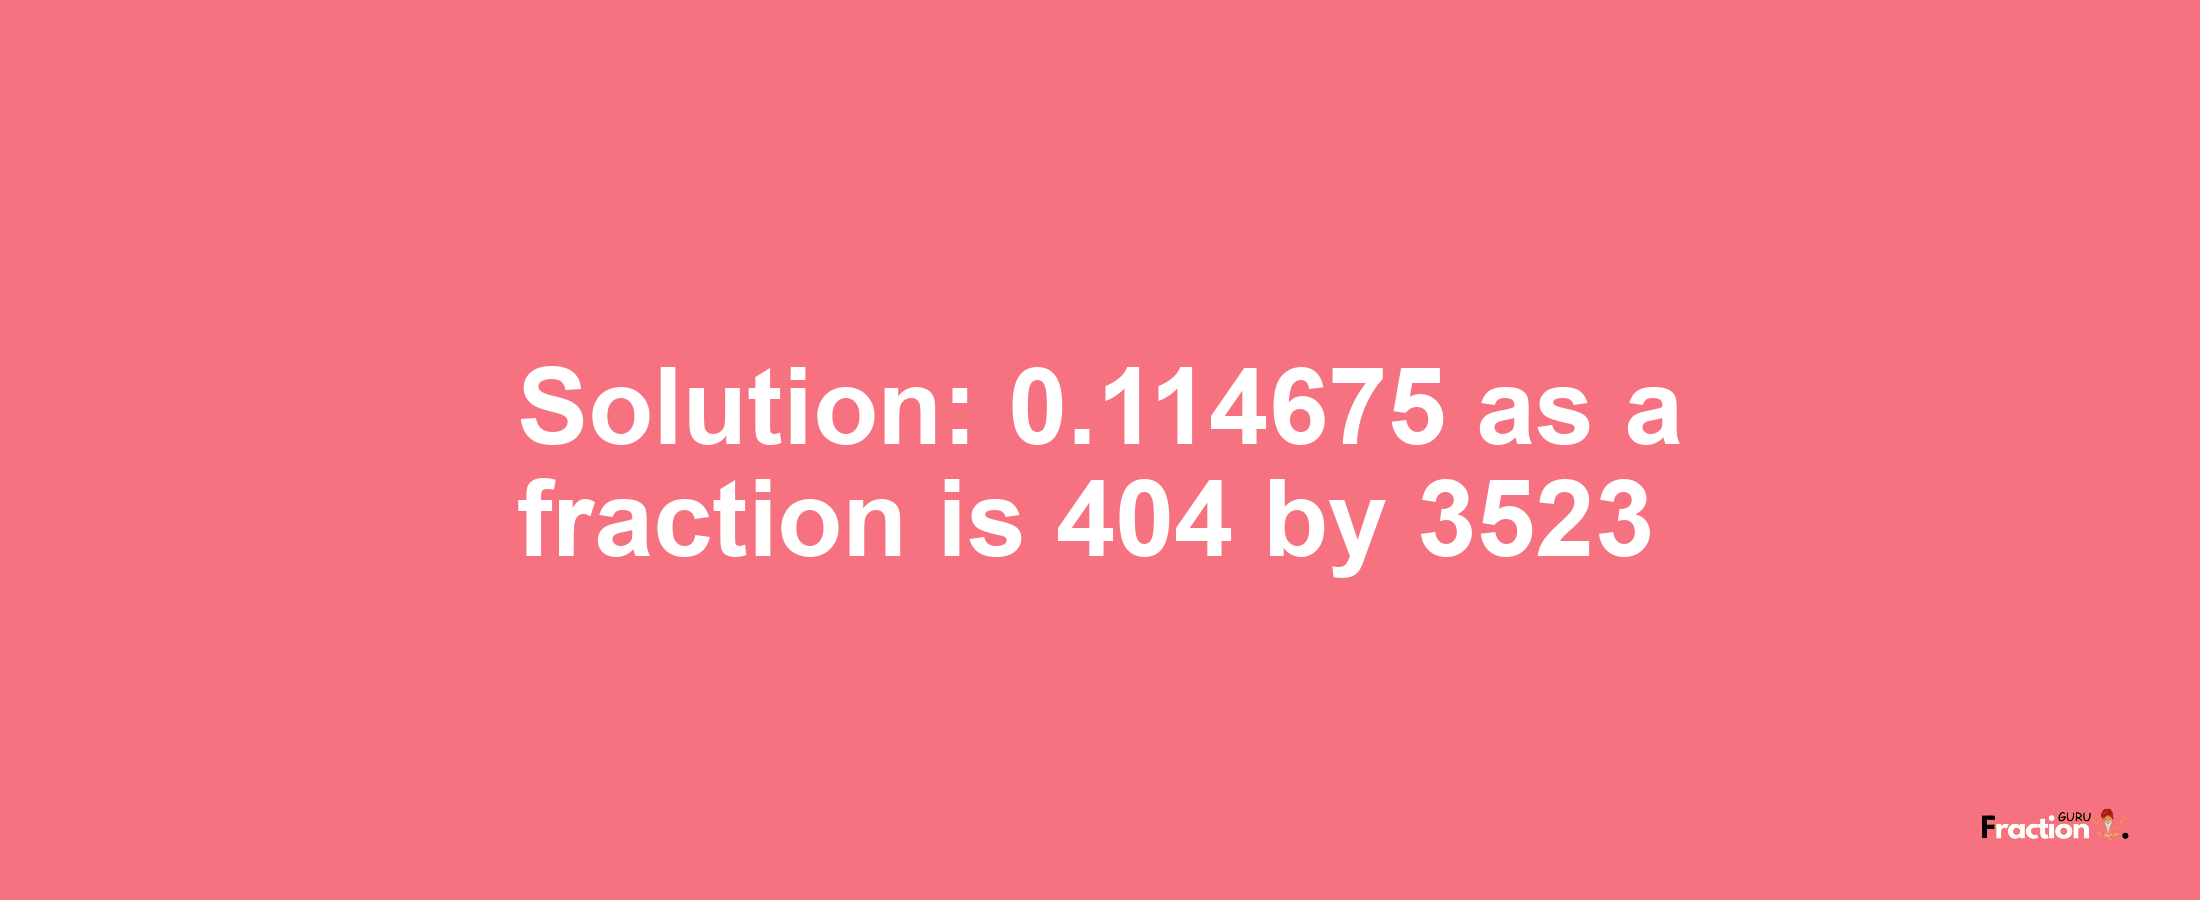 Solution:0.114675 as a fraction is 404/3523